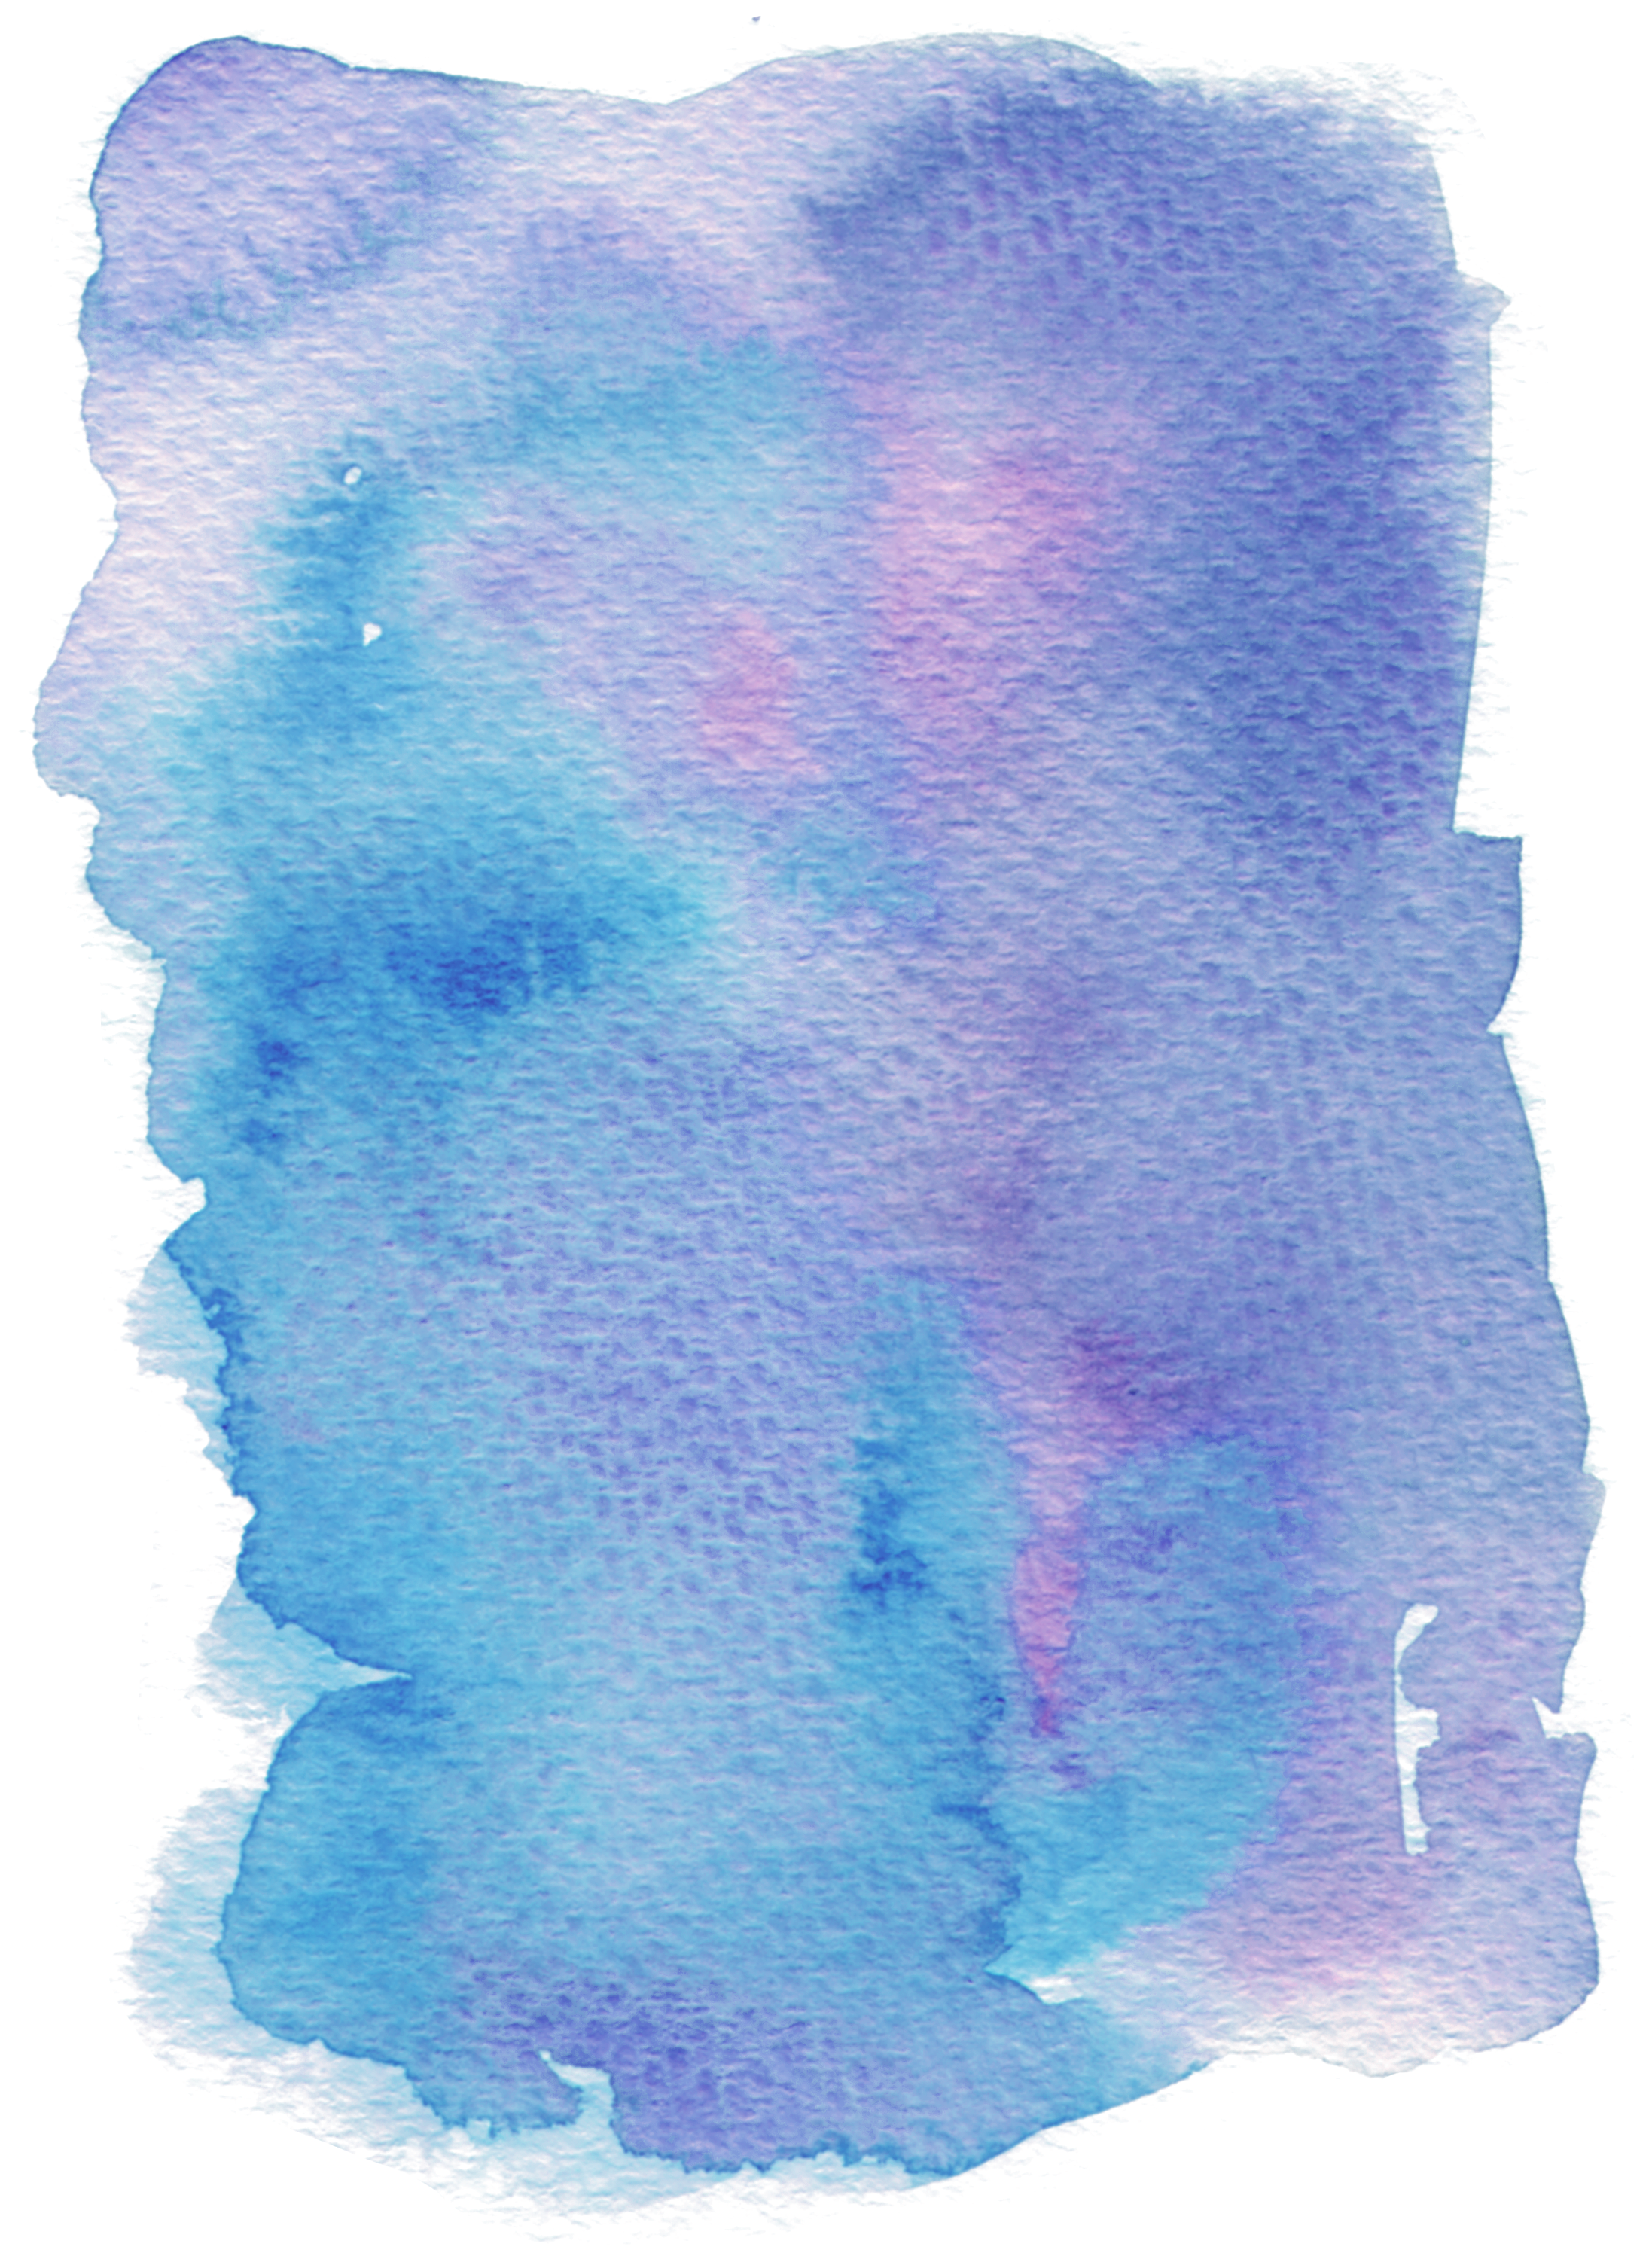 Watercolor Blue Painting Effect Free Photo PNG Clipart